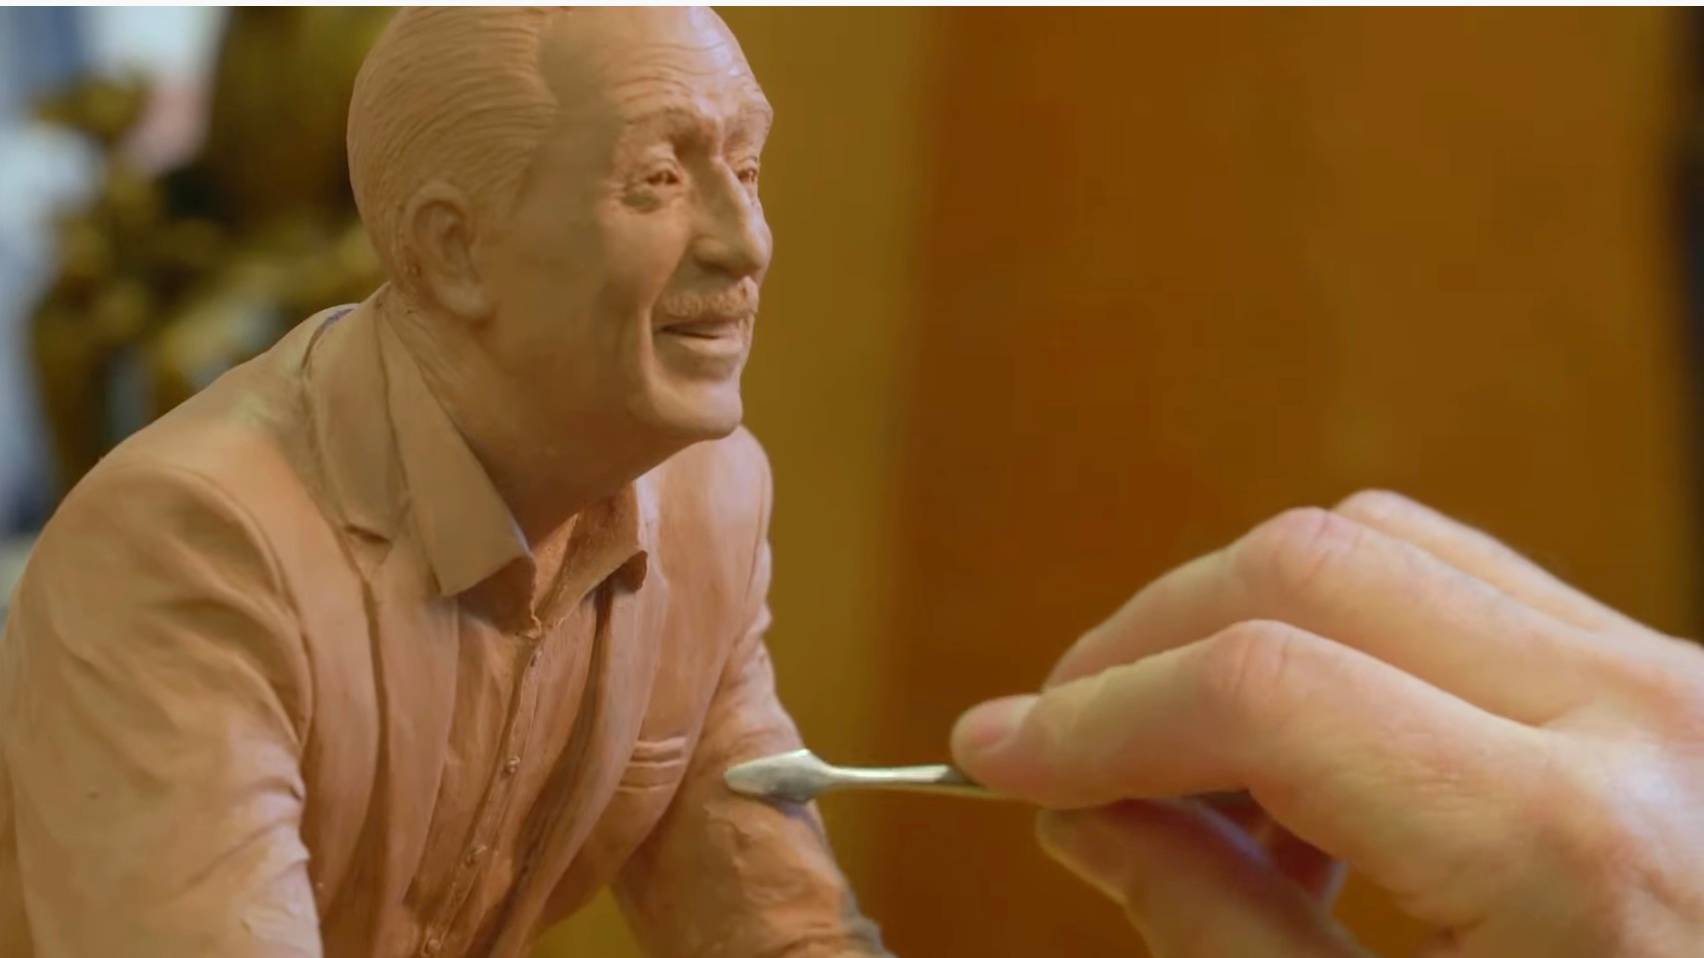 Sculpting the Walt Disney statue for Dreamers Point coming soon to EPCOT